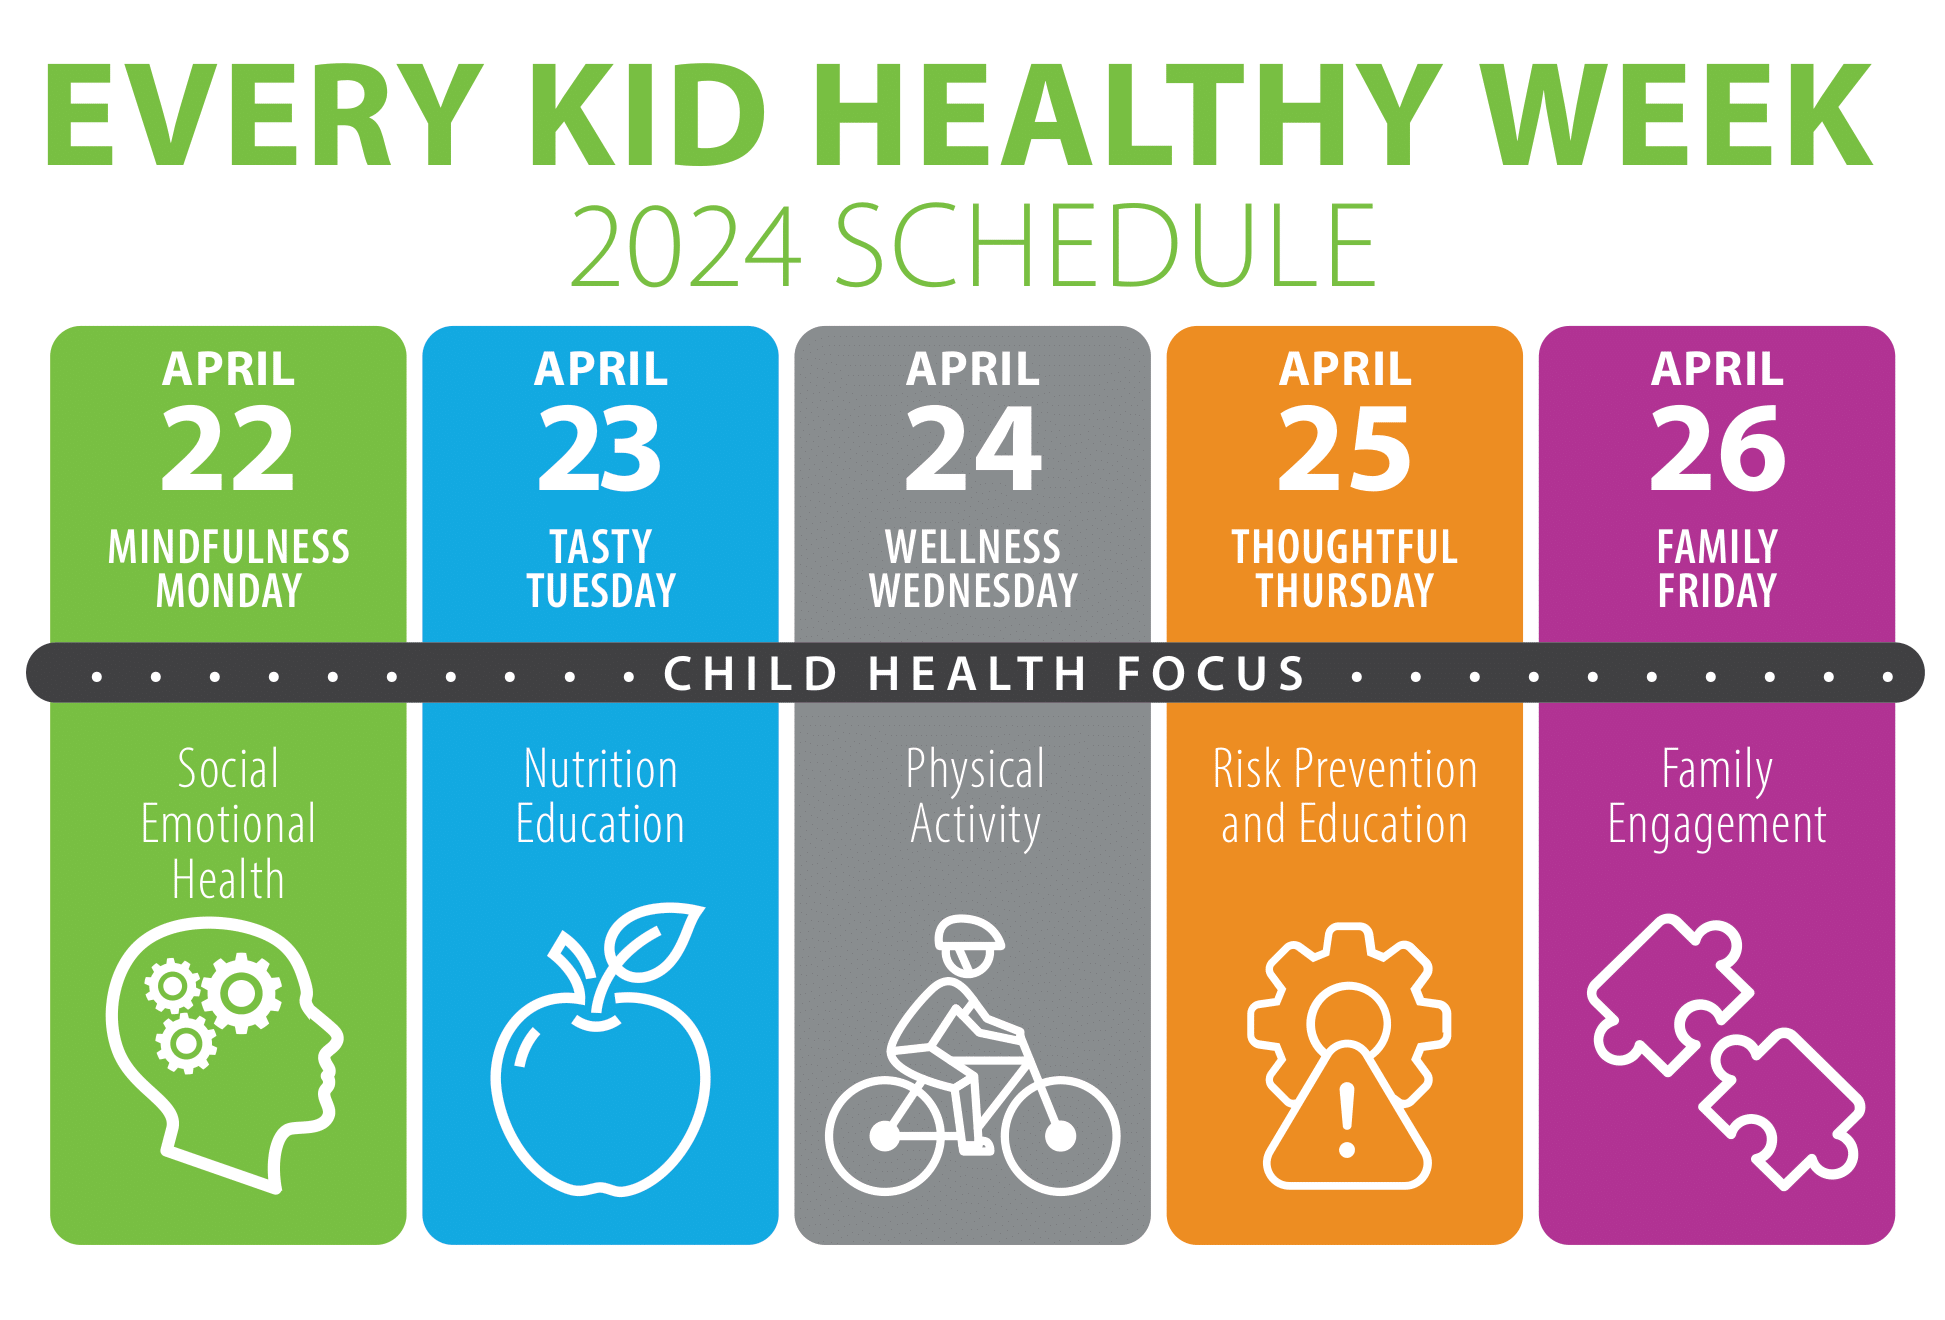 Every Kid Healthy Schedule for 2024